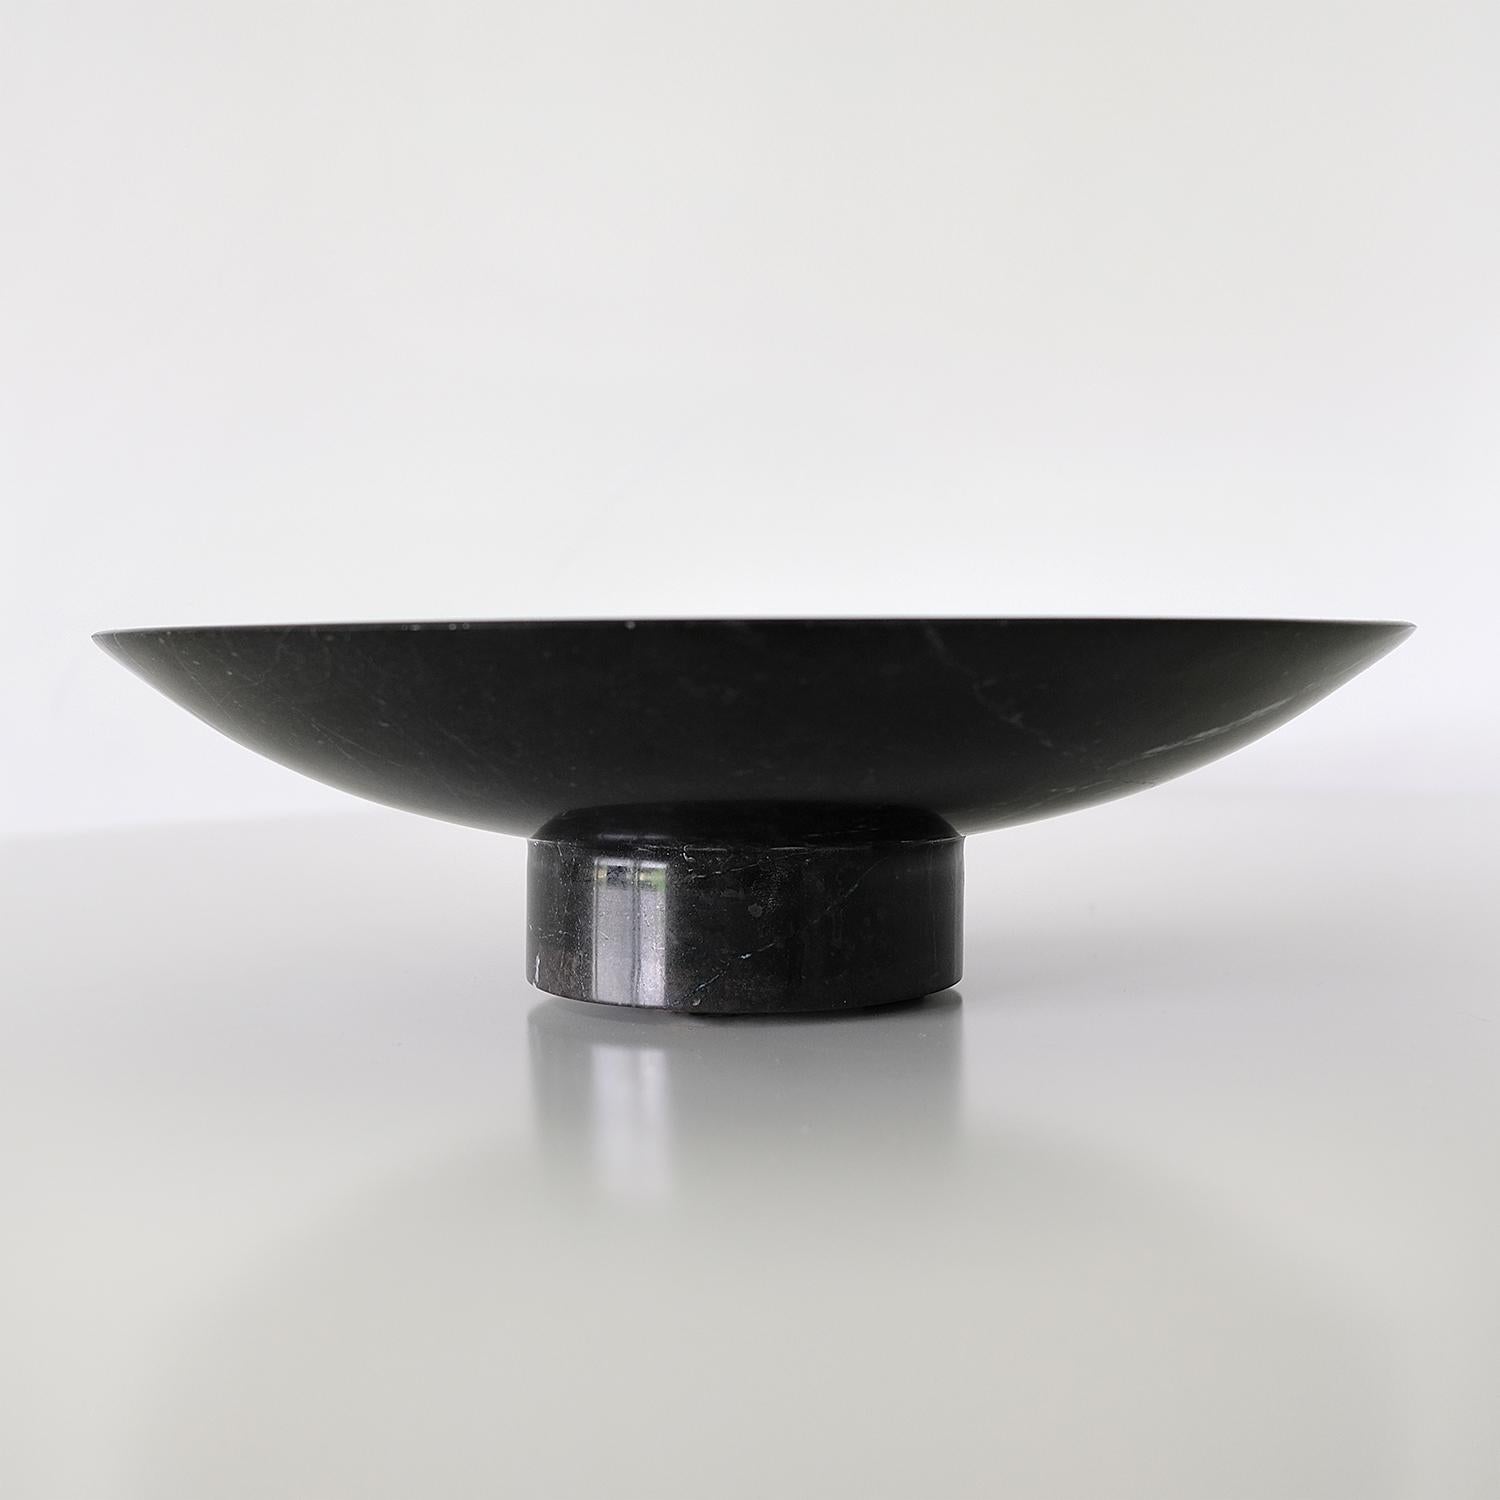 Minimalistic round footed serving tray/platter in polished black marble from the Mountainscapes collection of one-of-a-kind stone tabletop objects.